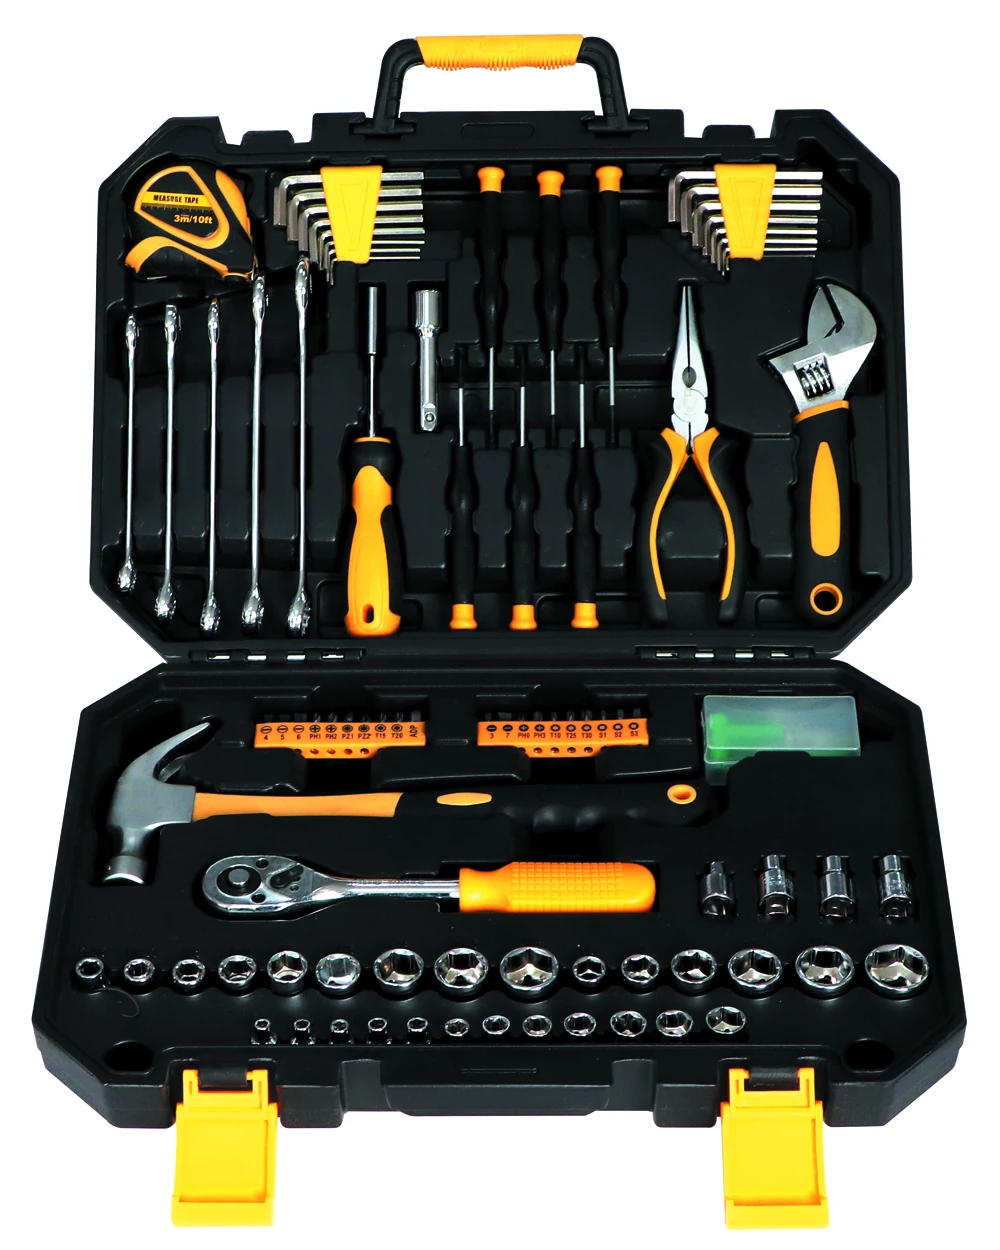 128pcs Professional Auto Car Repair Tool Kit For Home Machine Tools Set - Tools,Car Tools,Car Tool Kit Product on Alibaba.com